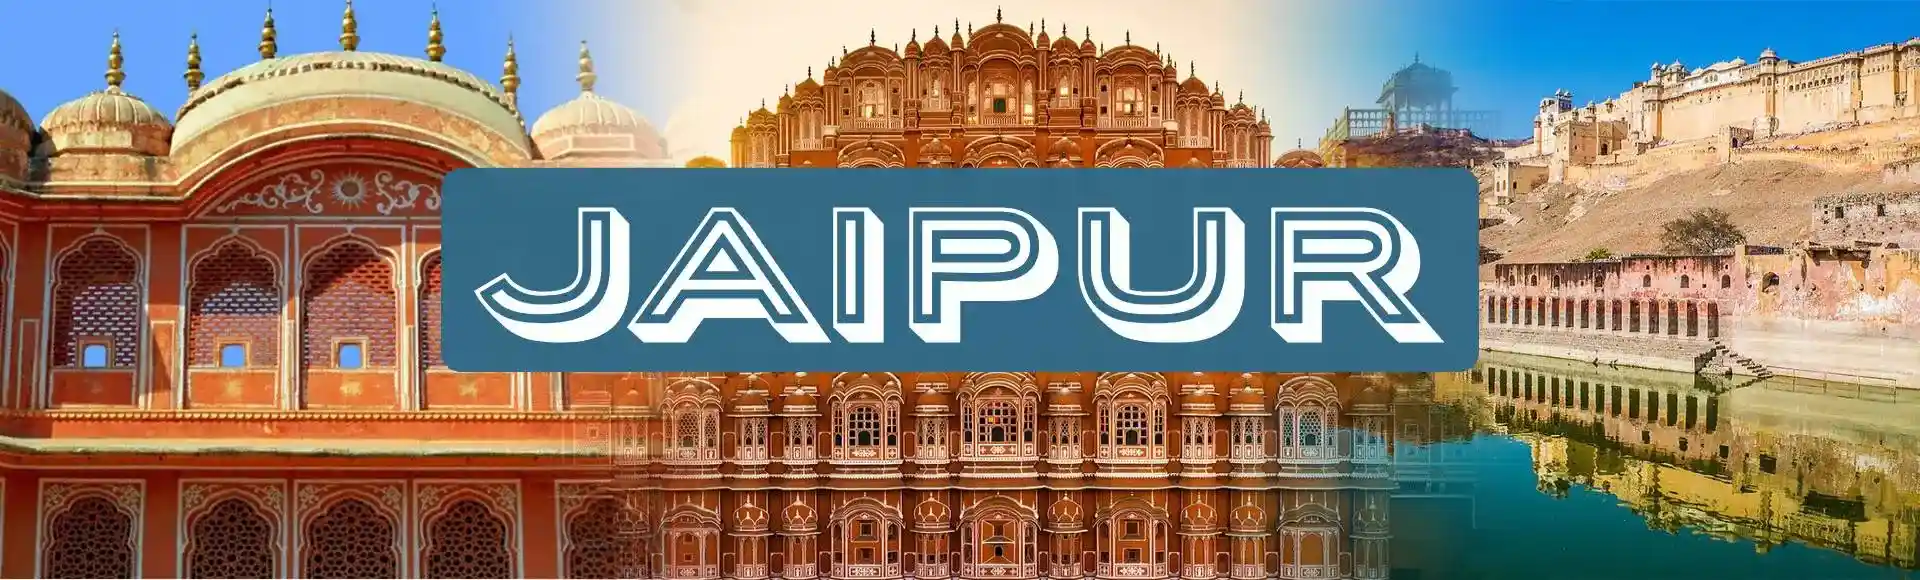 Jaipur tours packages